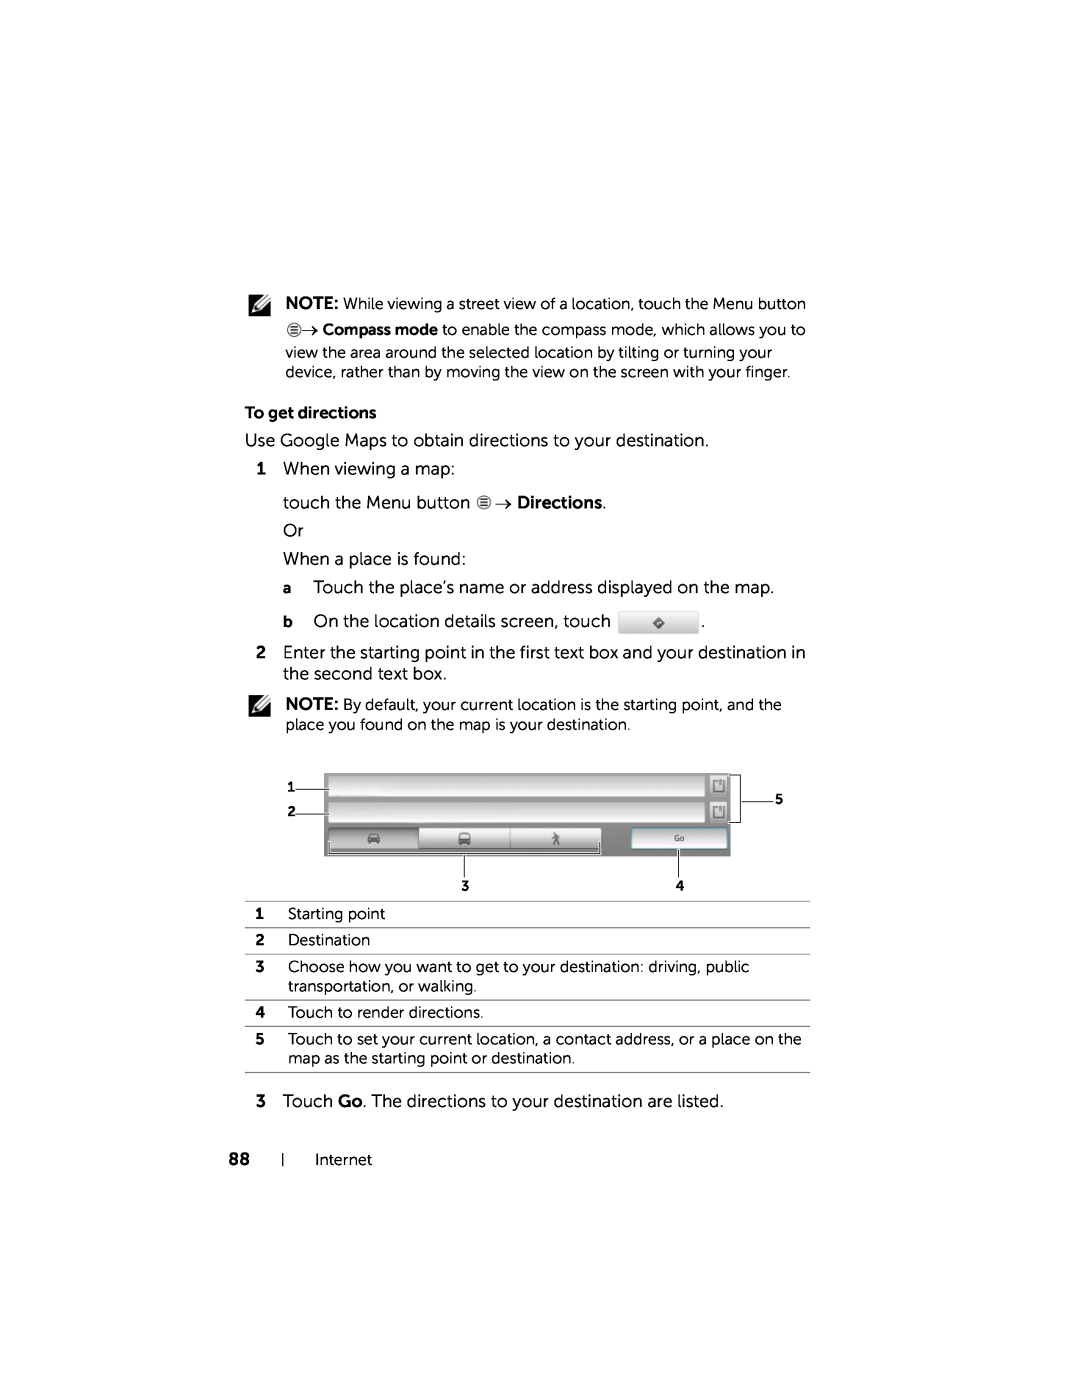 Dell 7 user manual To get directions 